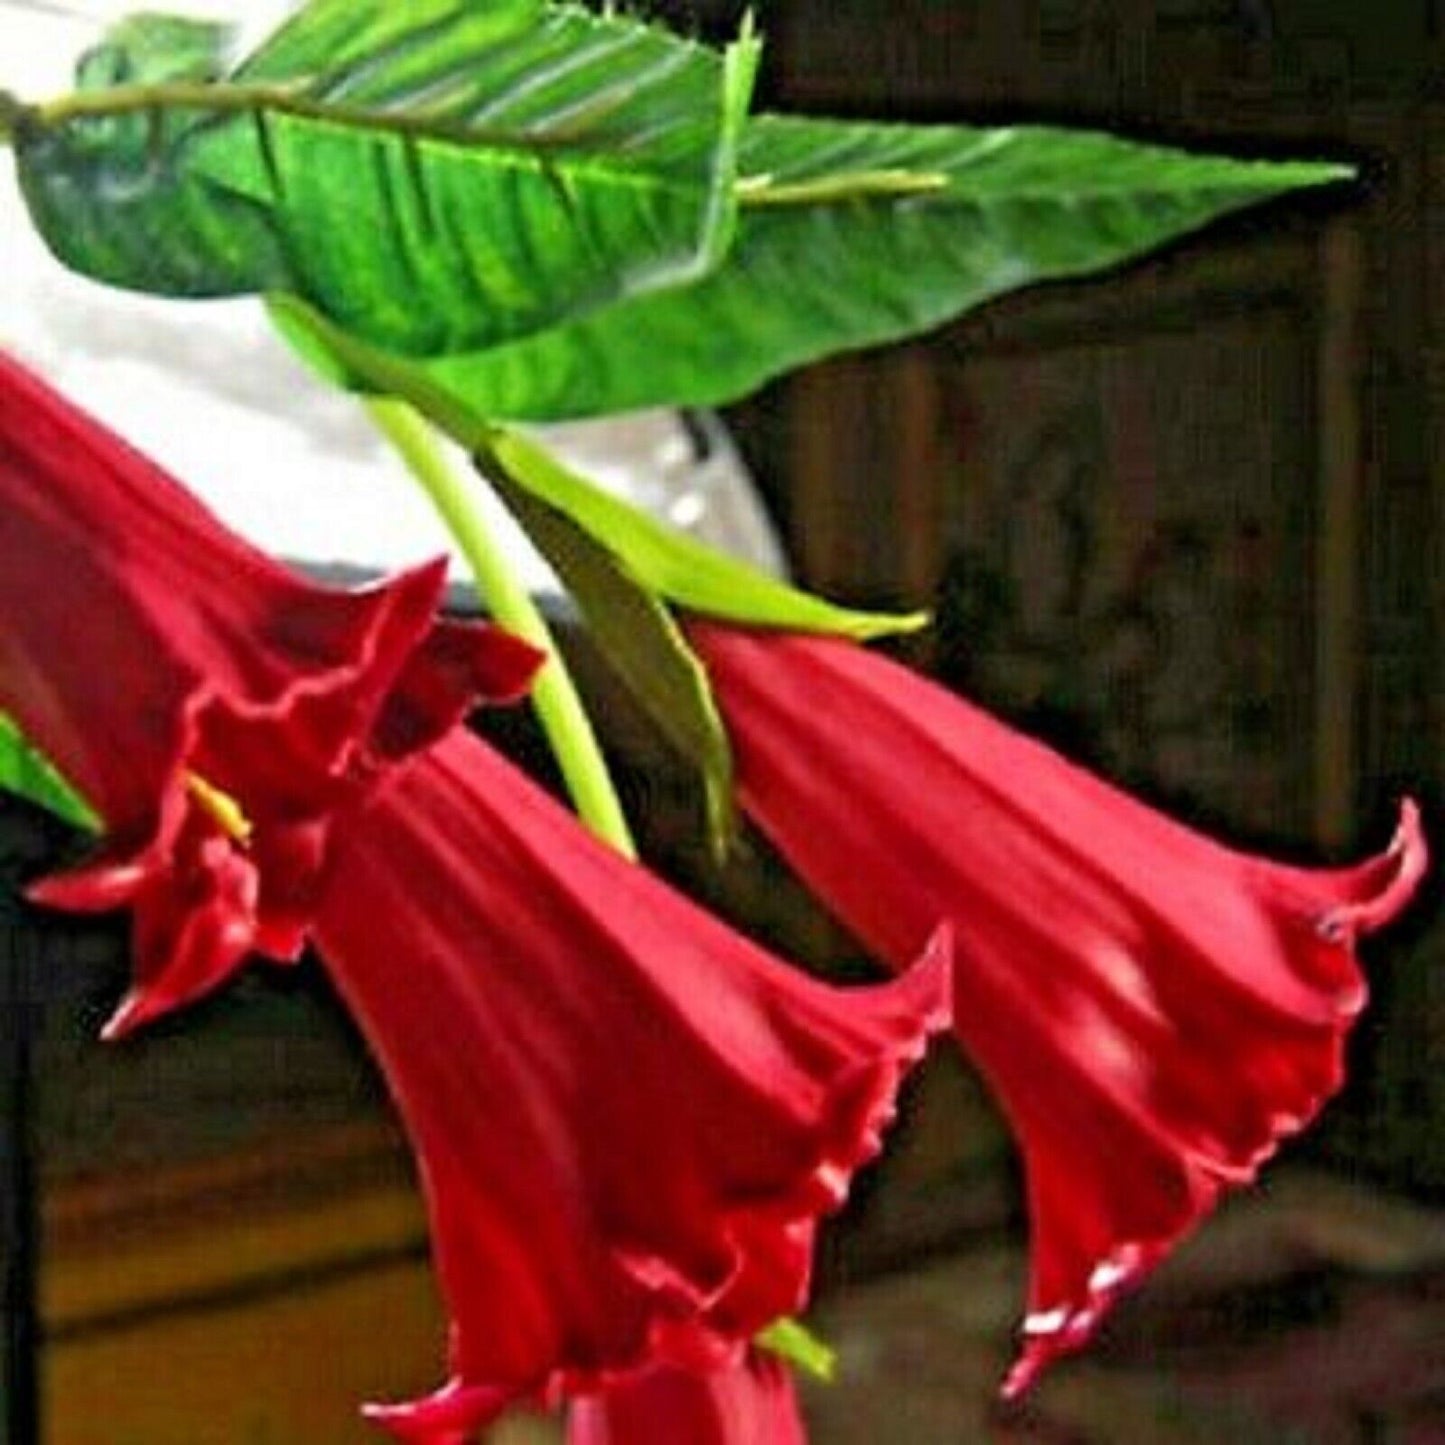 10 Candy Red Angel Trumpet Seeds Flowers Seed Flower Brugmansia Datura 632 USA